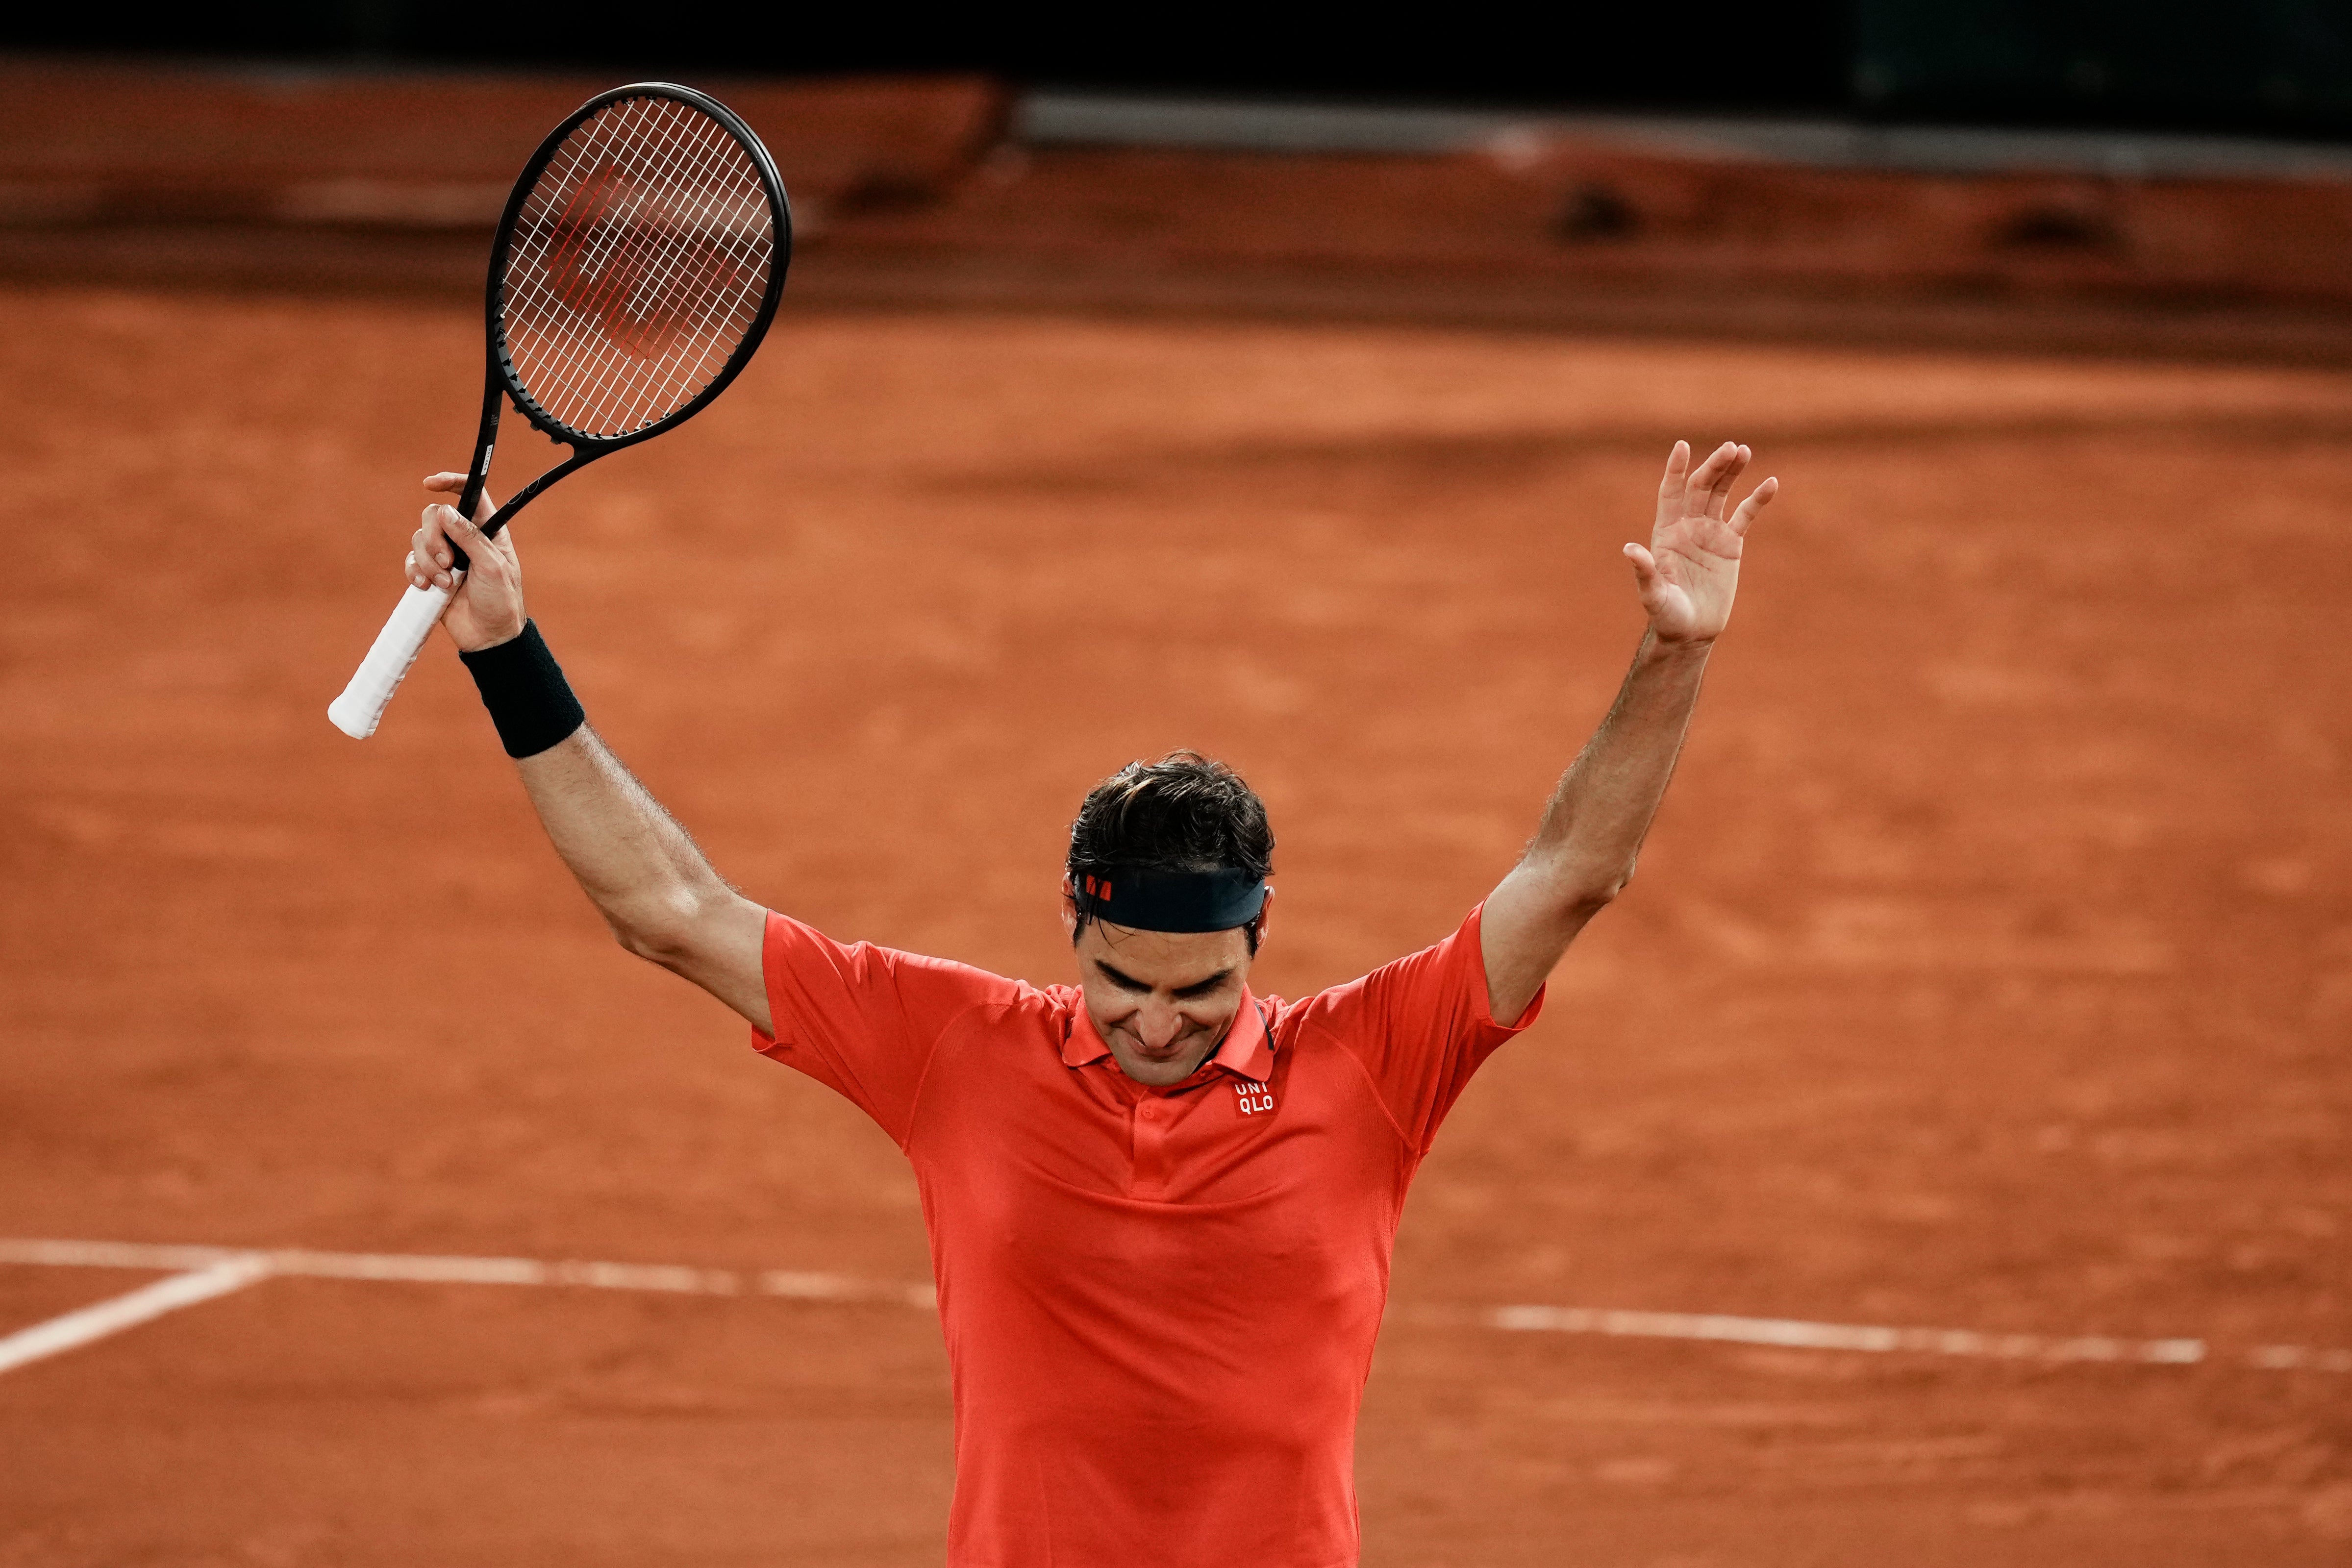 Adieu, Roger Federer pulls out of French Open after Round 3 Novak Djokovic Matteo Berrettini Rafael Nadal All England Club Paris The Independent